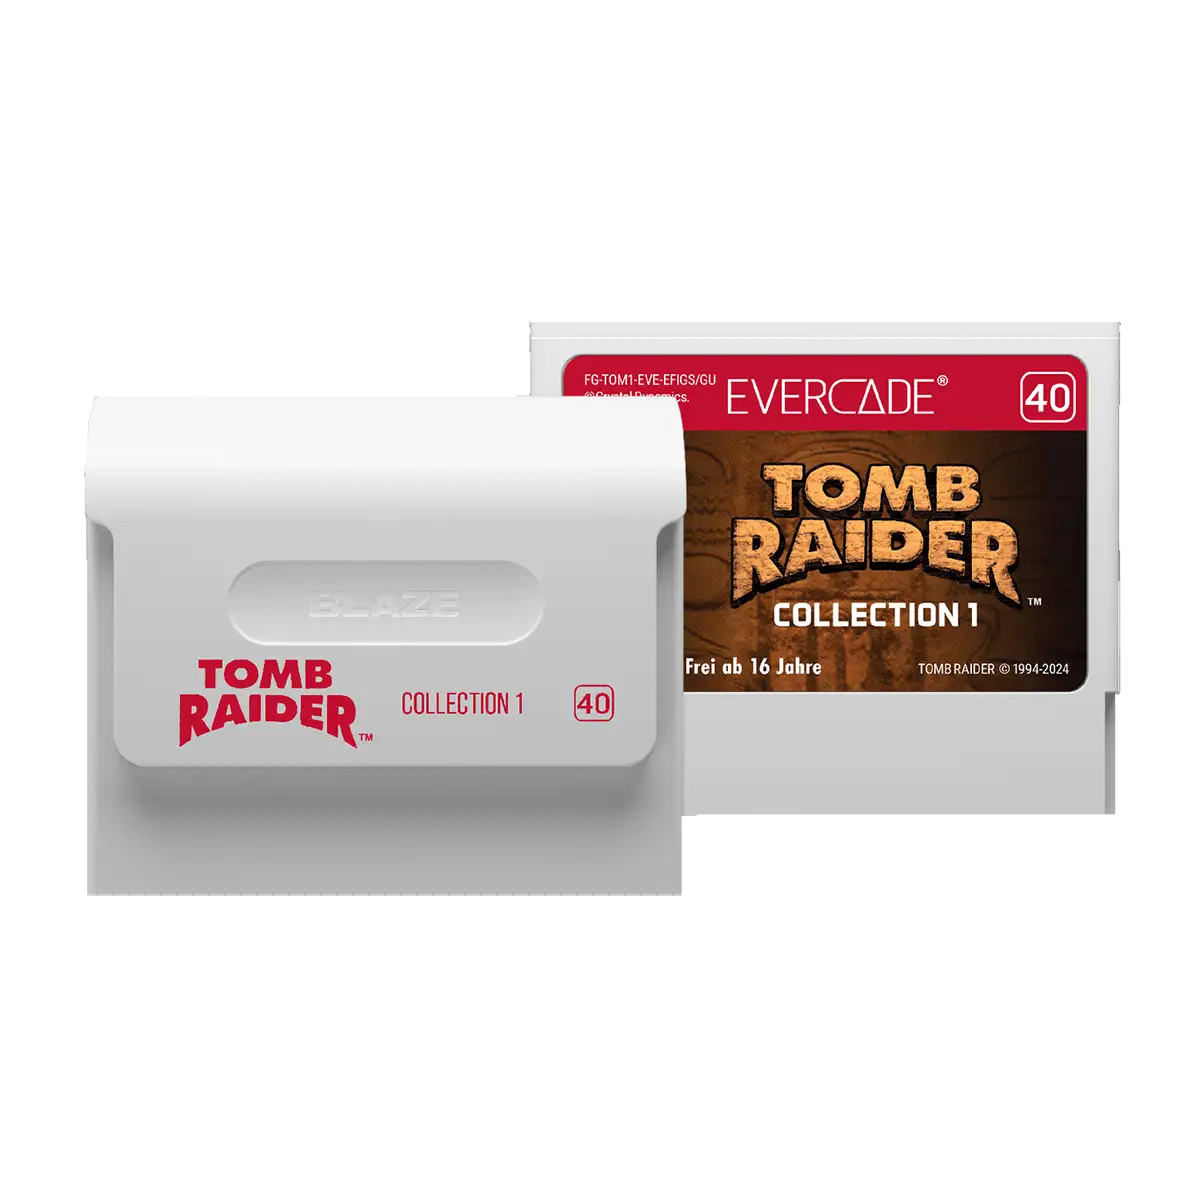 Evercade EXP-R + Tomb Raider Collection 1 Image 5